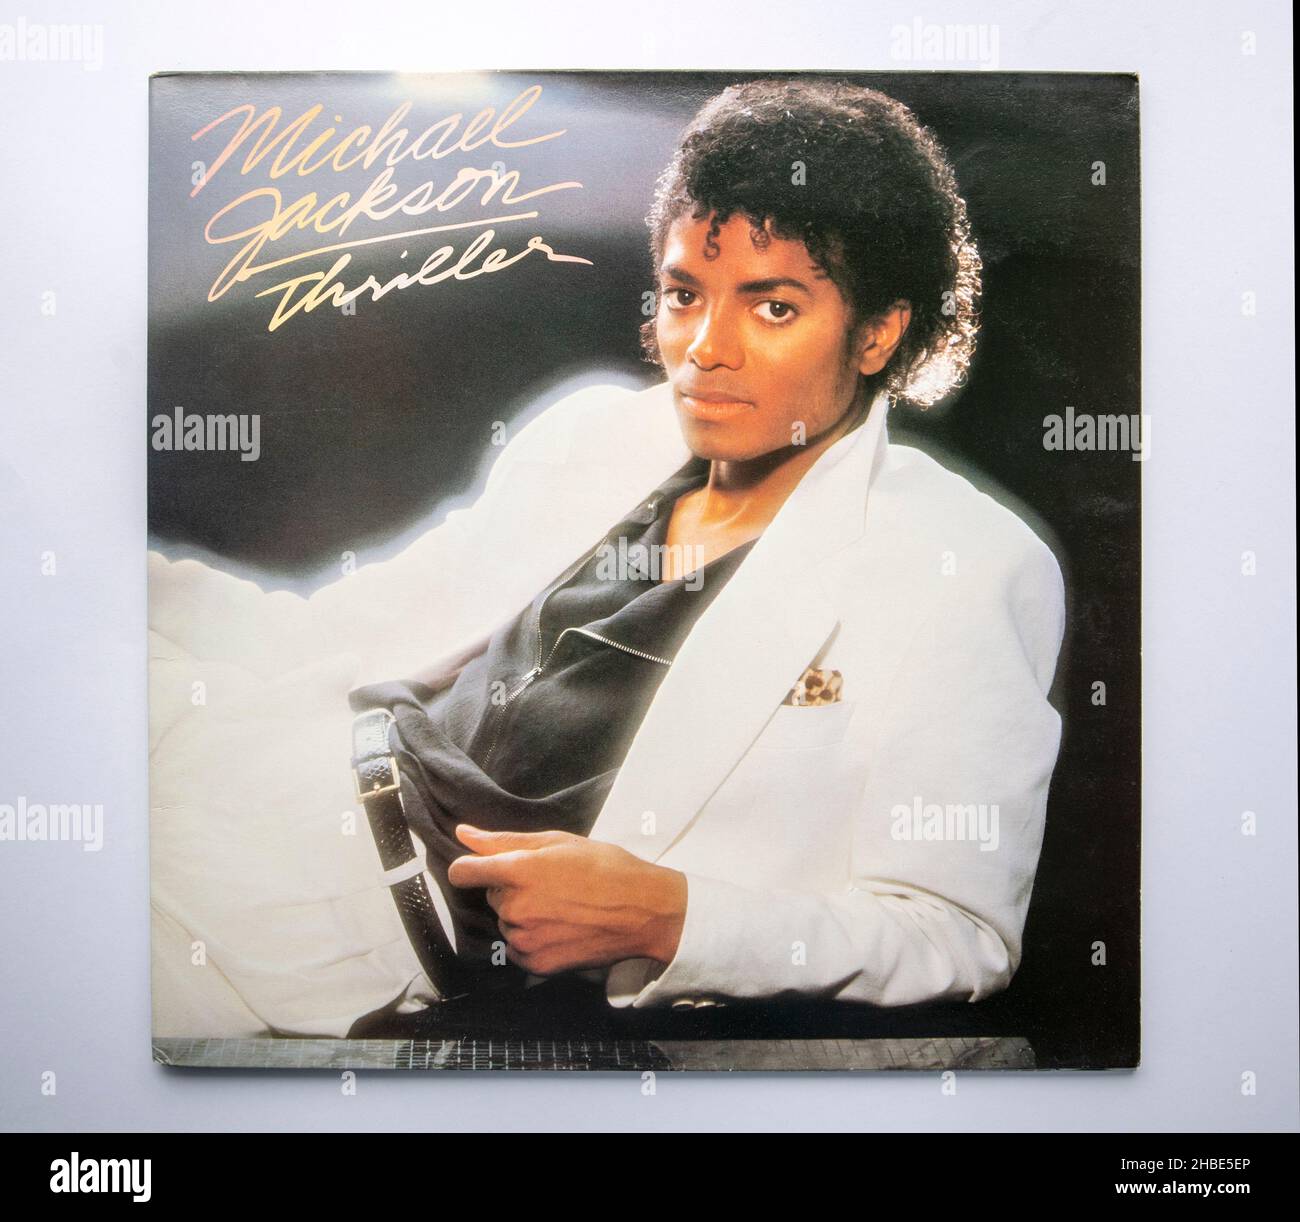 Michael jackson record album hi-res stock photography and images - Alamy